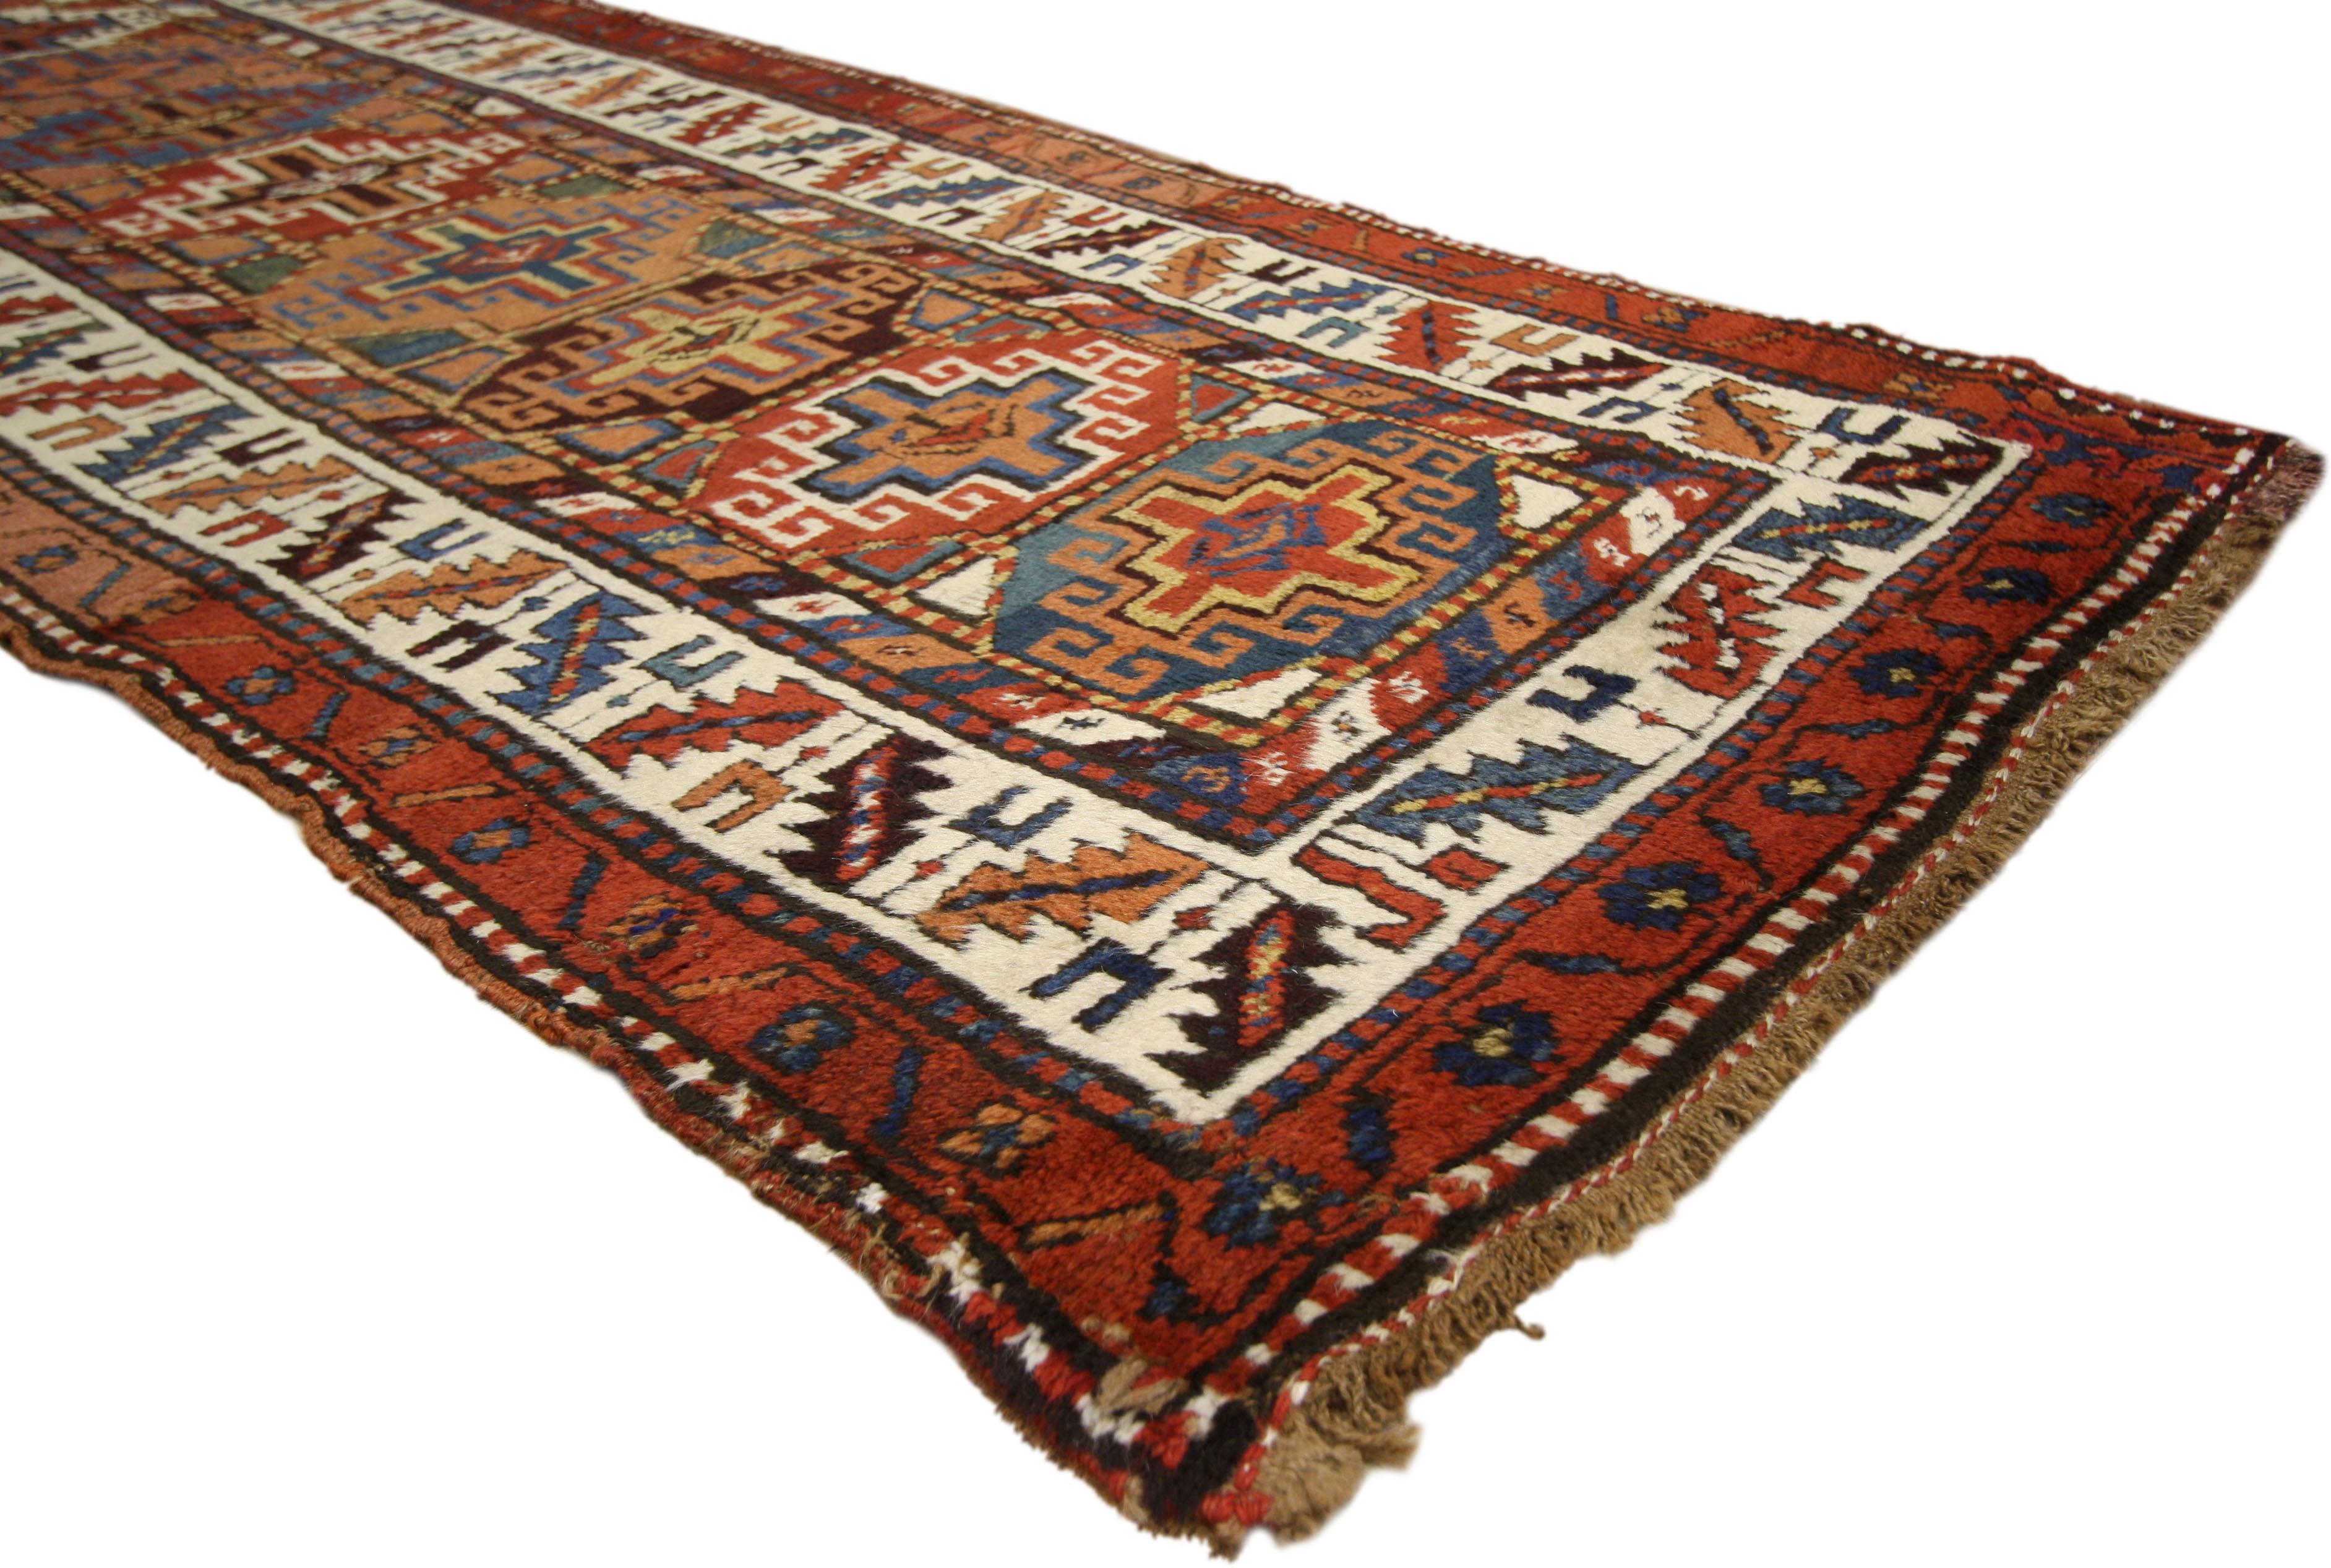 70590, antique Persian Kurdish rug with Nomadic Raconteur style, hallway runner. An antique artifact of nomadic Kurds, this Persian rug was handwoven with rich ornament and colors throughout. Depth and beauty abound in this antique Kurdish Rug with